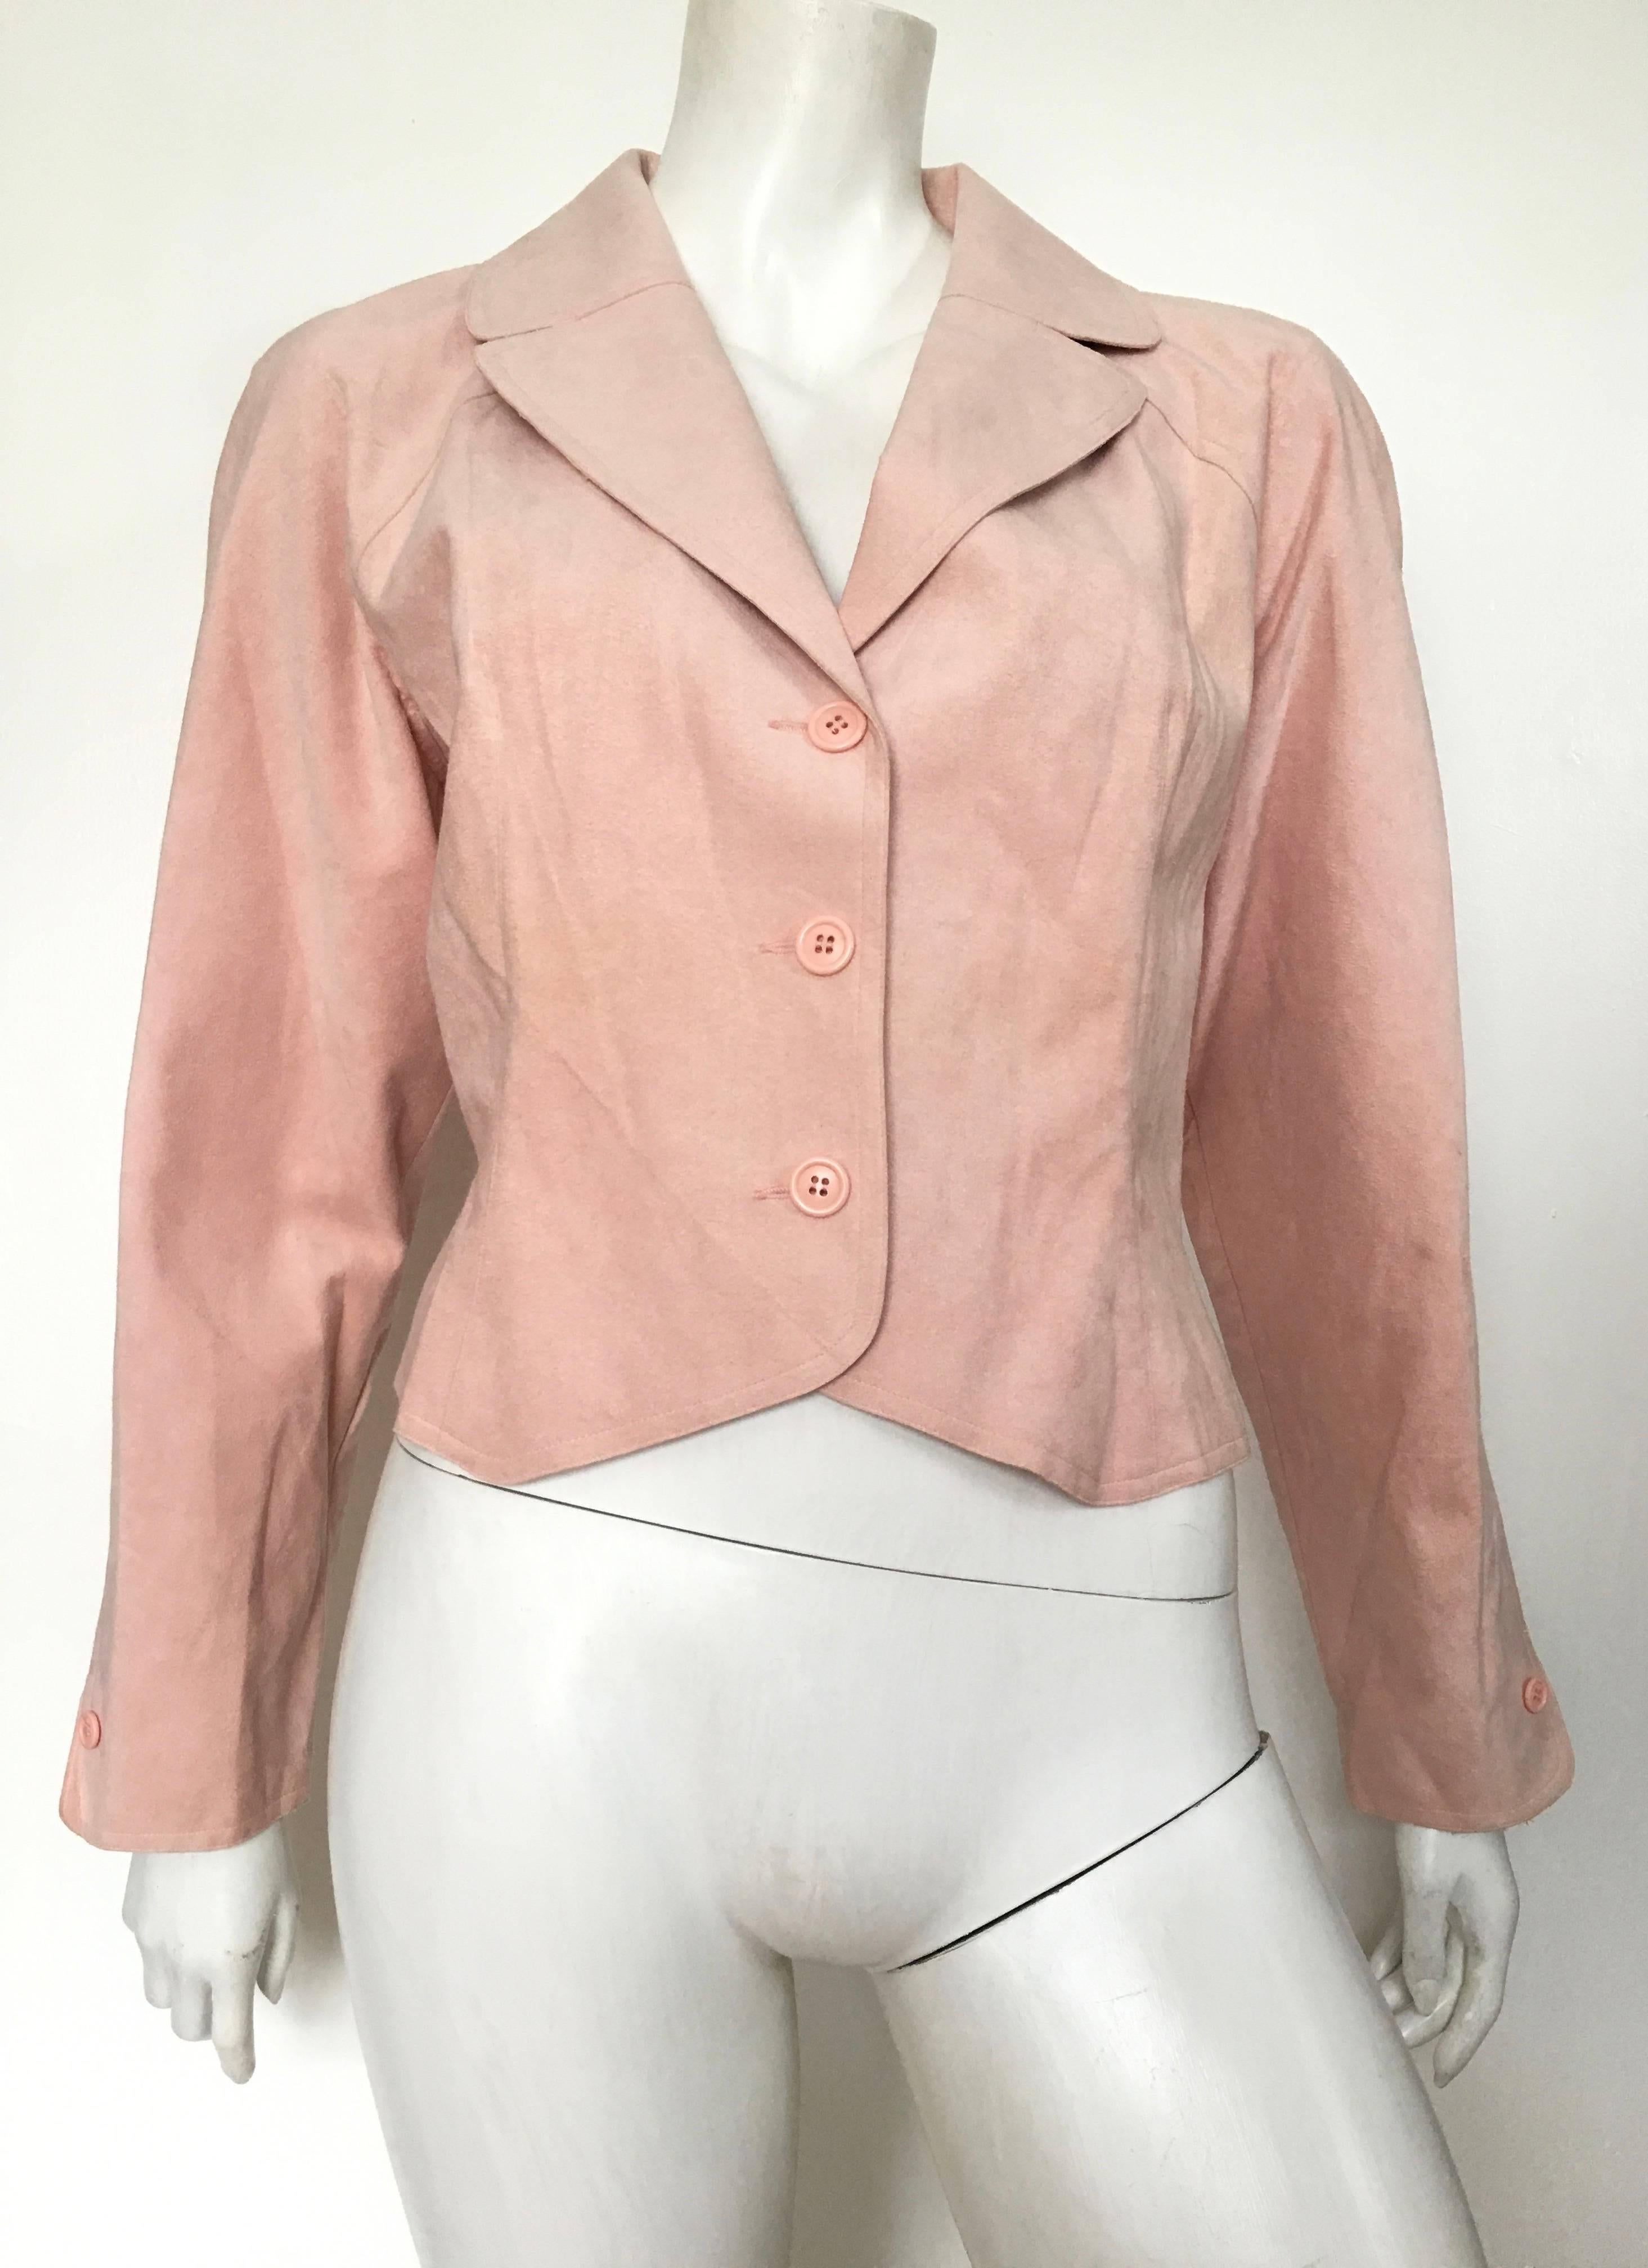 HALSTON 1970s pink ultra suede cropped jacket is a size 14.  Ladies please grab your tape measure so you can properly measure your bust, waist & arms to make sure this vintage treasure will fit you to perfection. This gorgeous cropped jacket,